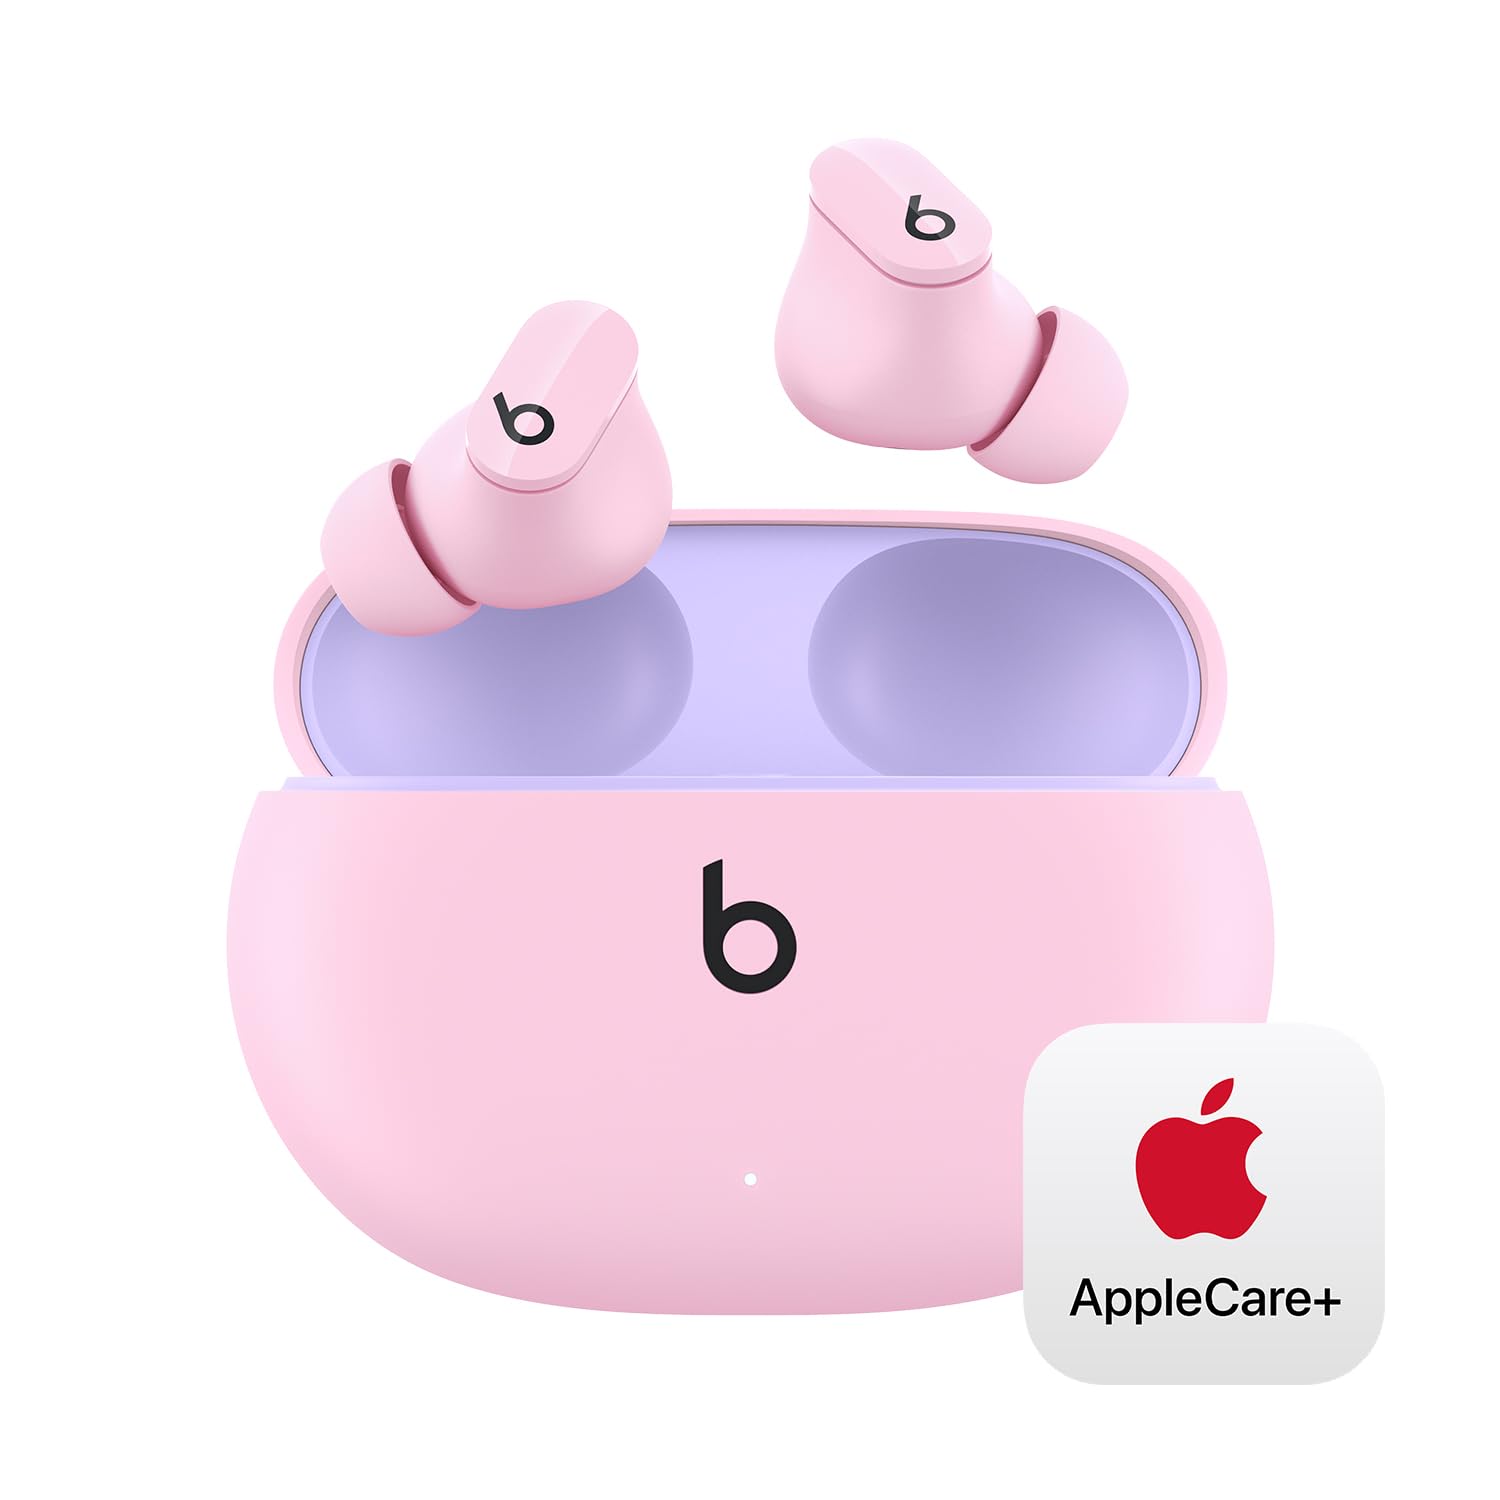 Beats Studio Buds - Sunset Pink with AppleCare+ (2 Years)